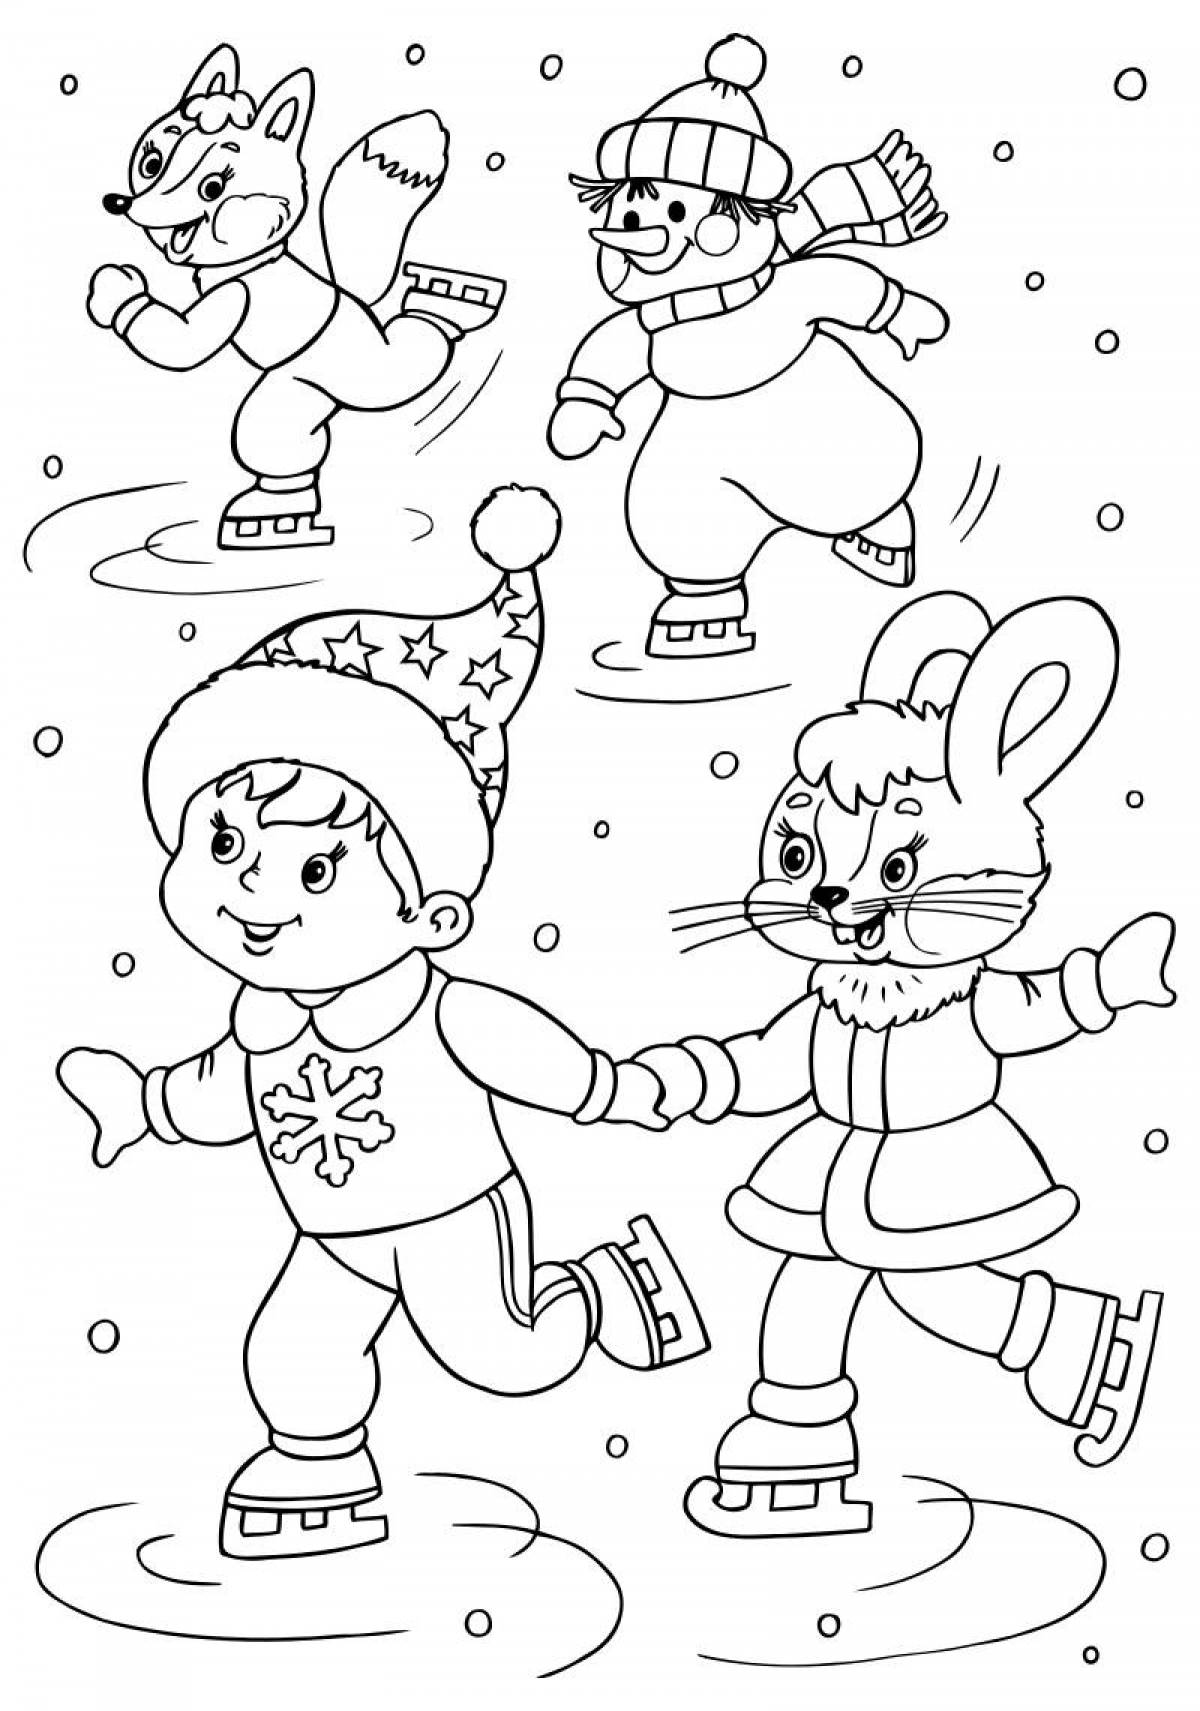 Violent coloring winter for children 4-5 years old